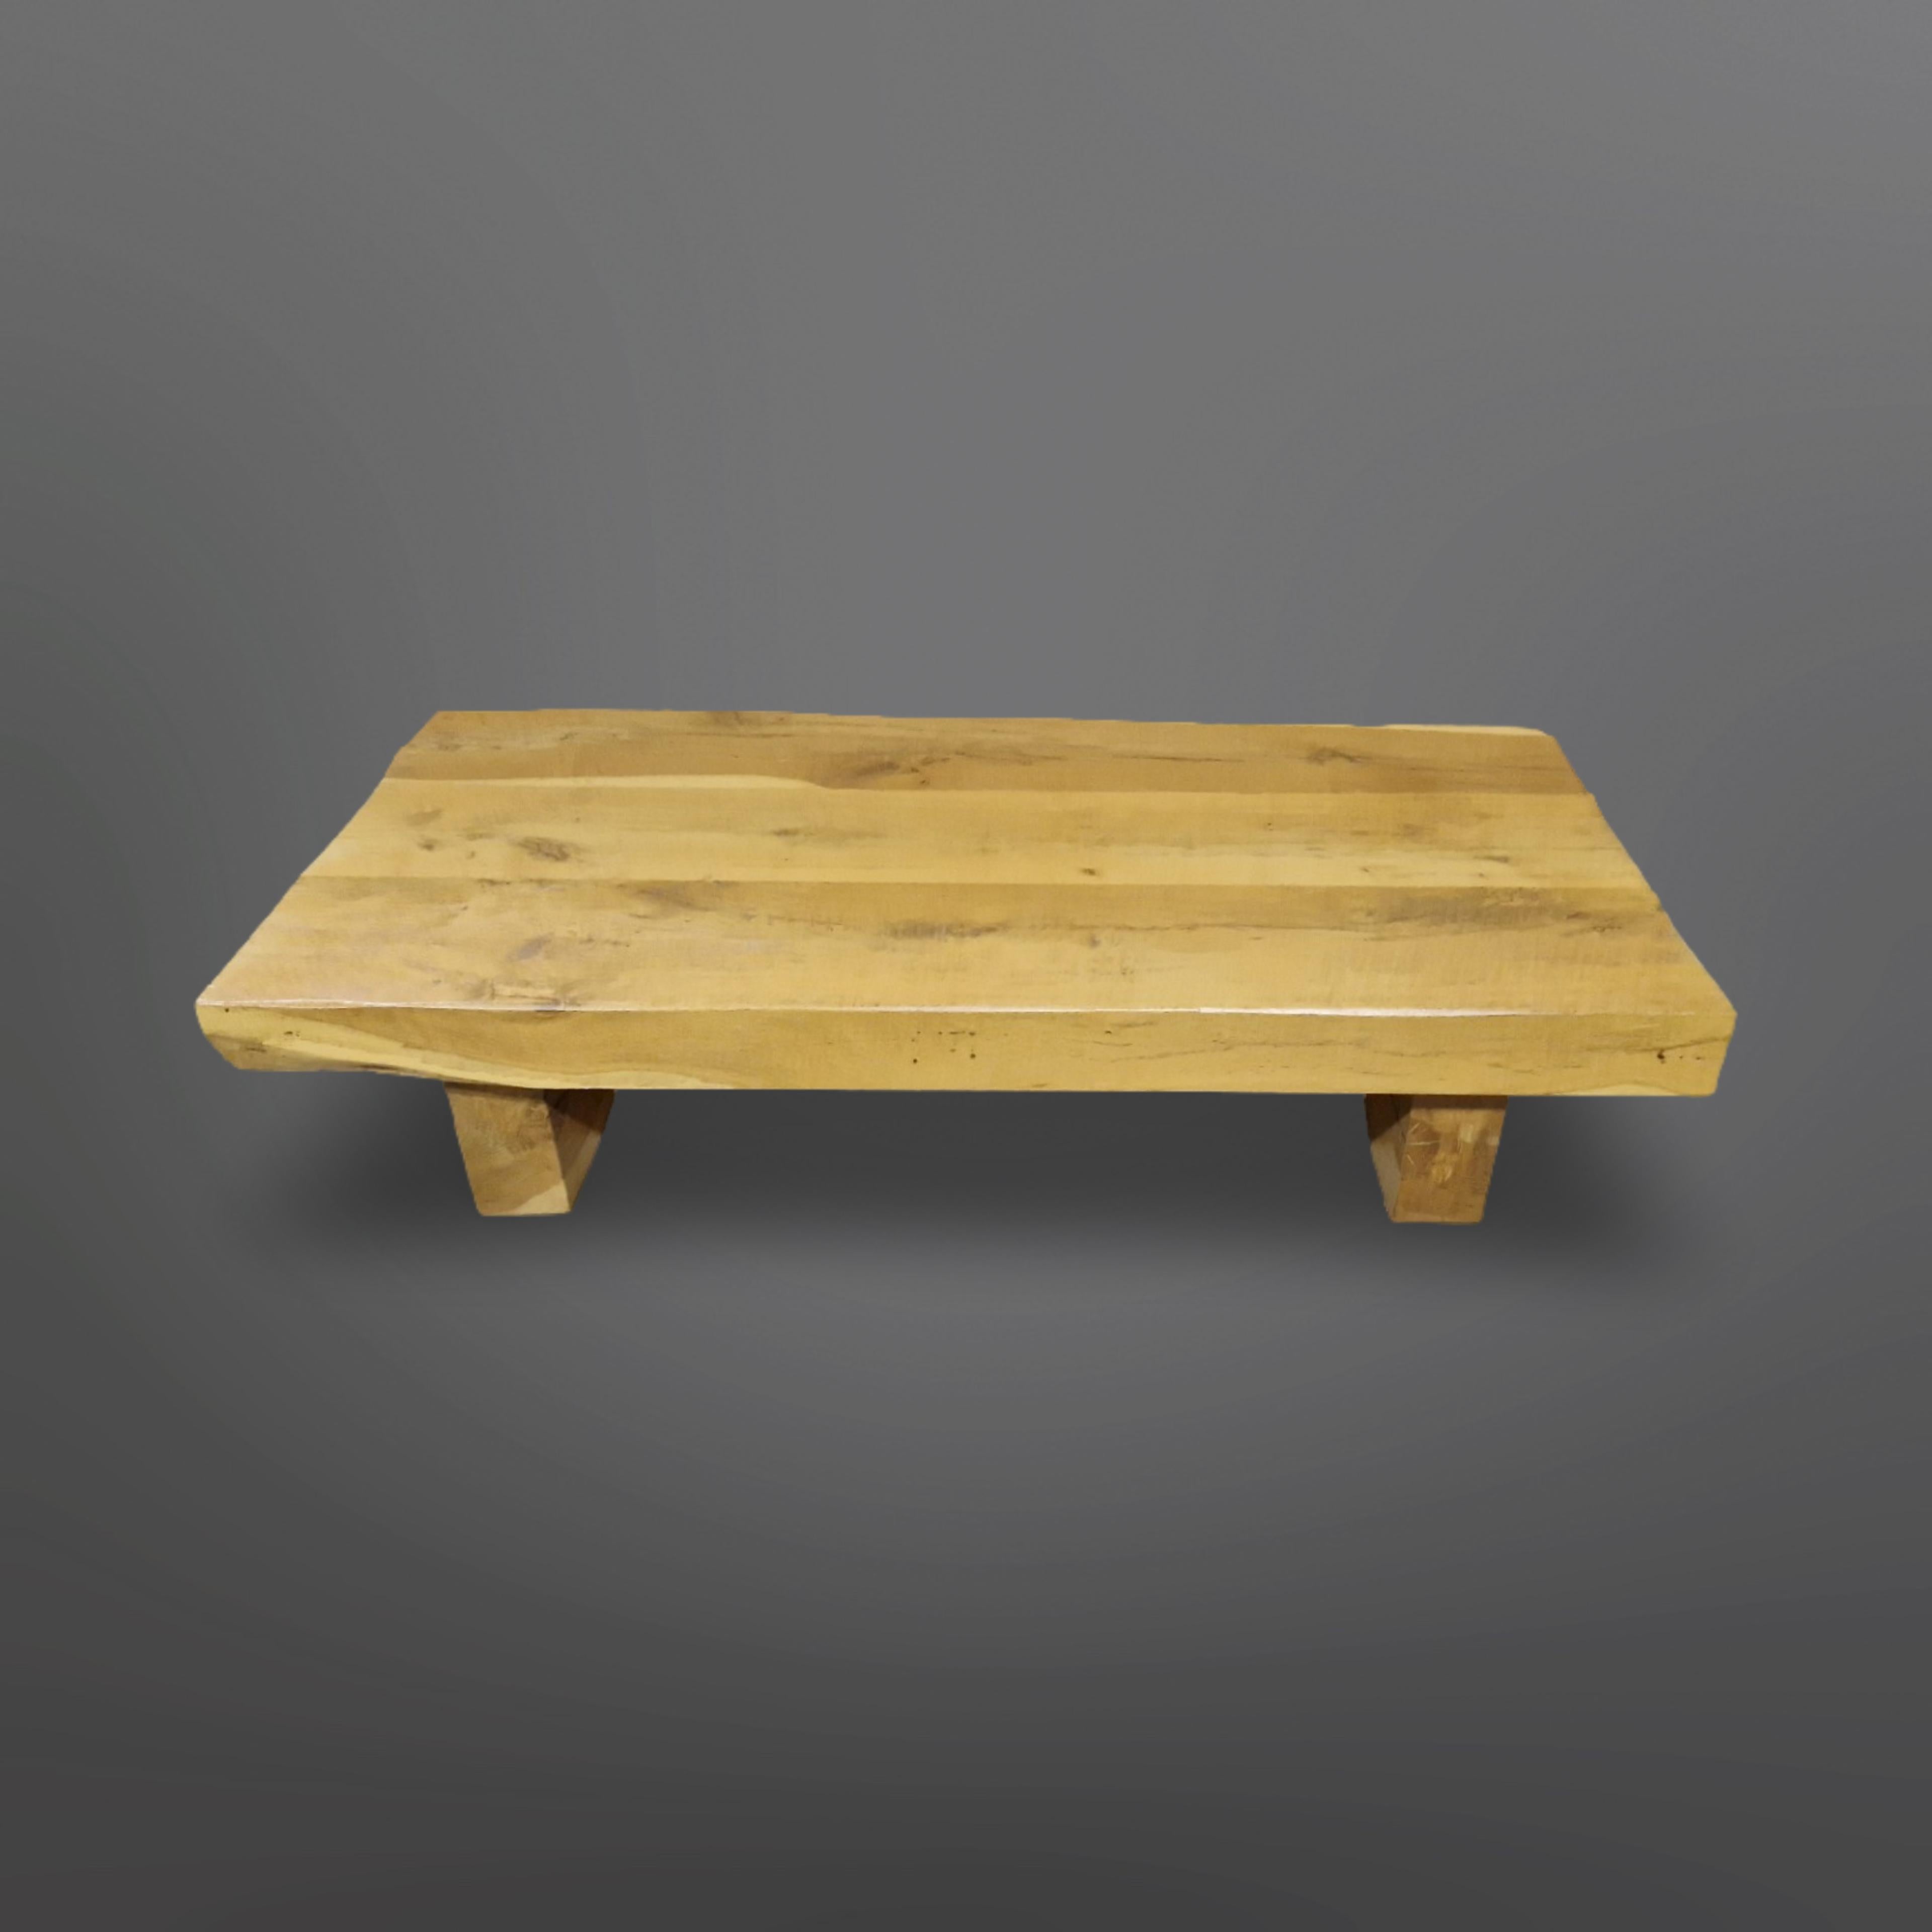 Brutalist wabi sabi coffee table. Heavy craftfully made piece with a great natural look. It will fit in every interior. Made from solid reclaimed oak. The top is made from 3 beams that have been joined together. The legs are also made from solid oak